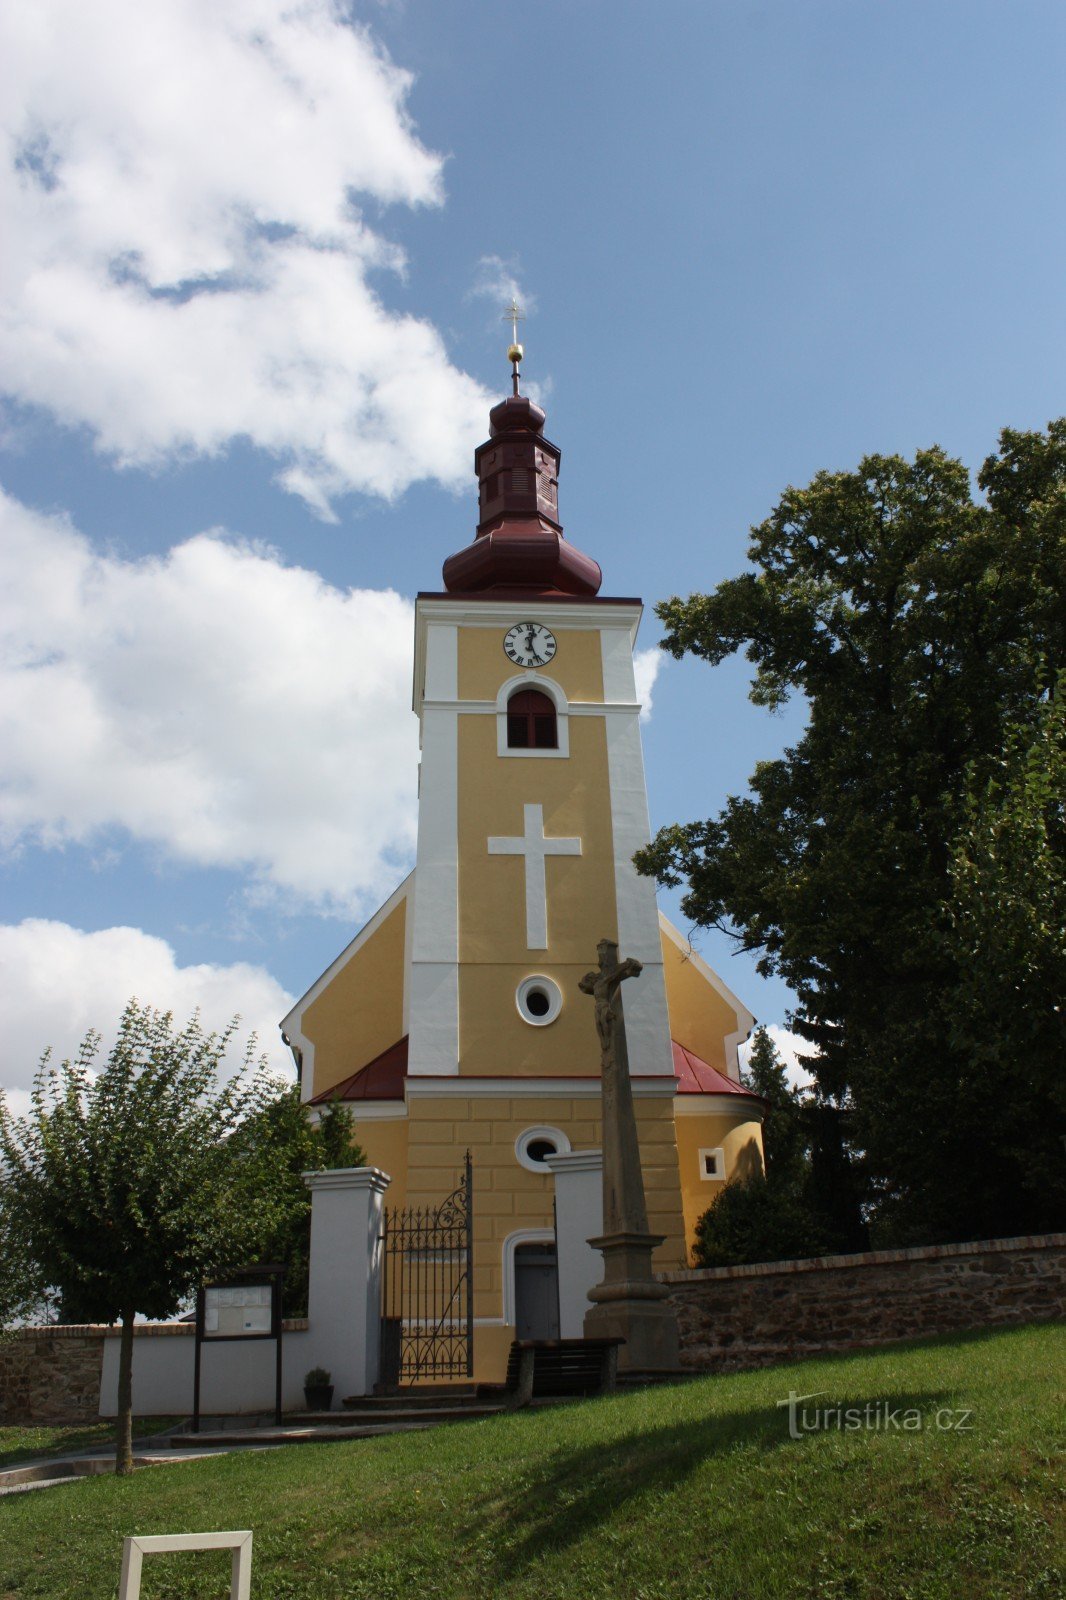 The Tree of Reconciliation in front of the church in Kučerov